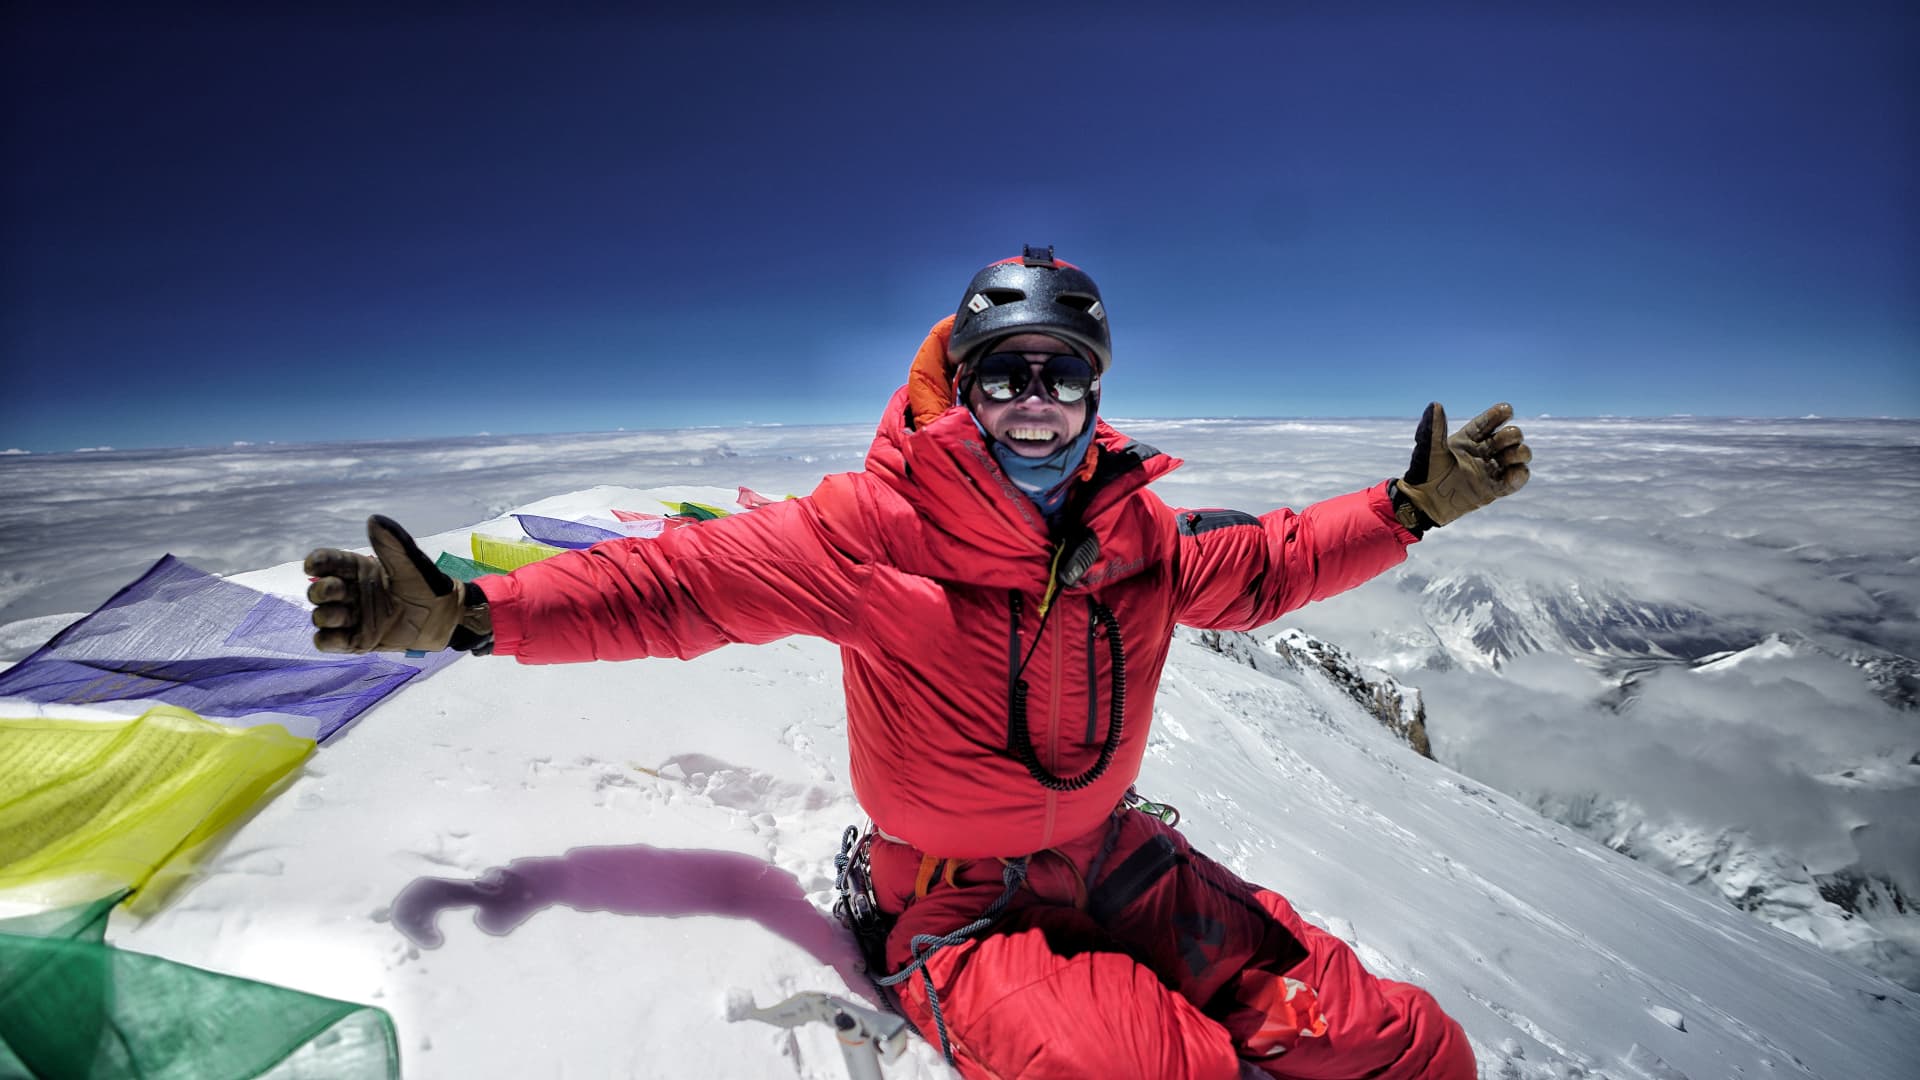 Adrian Ballinger, pictured at the summit of K2, the world's second-highest peak after Mount Everest.